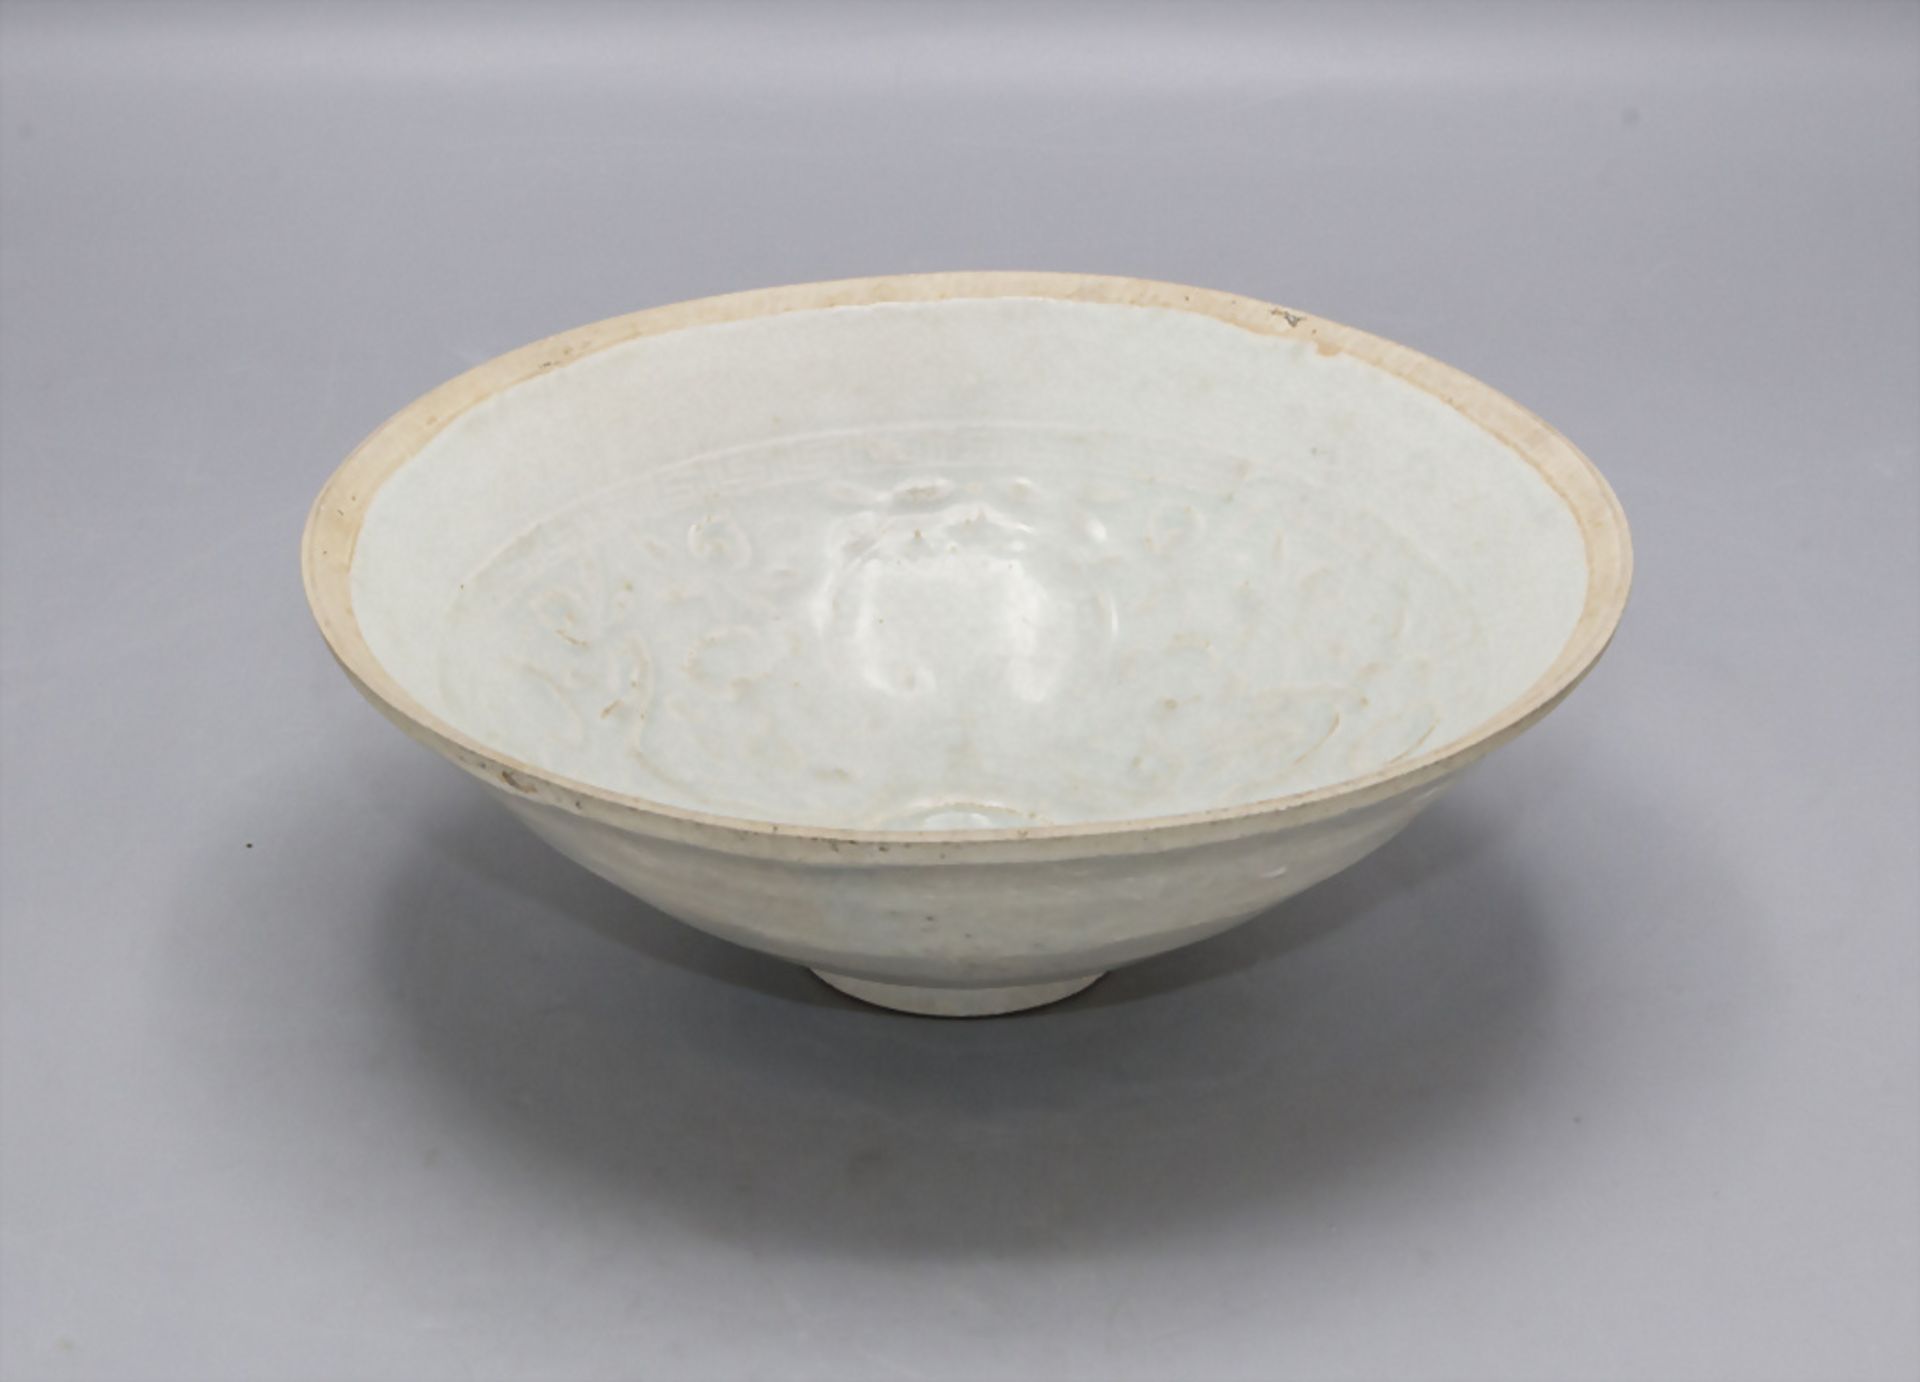 Kumme / A porcelain bowl, China, Yuan/Song-Dynastie, wohl 12./13. Jh.